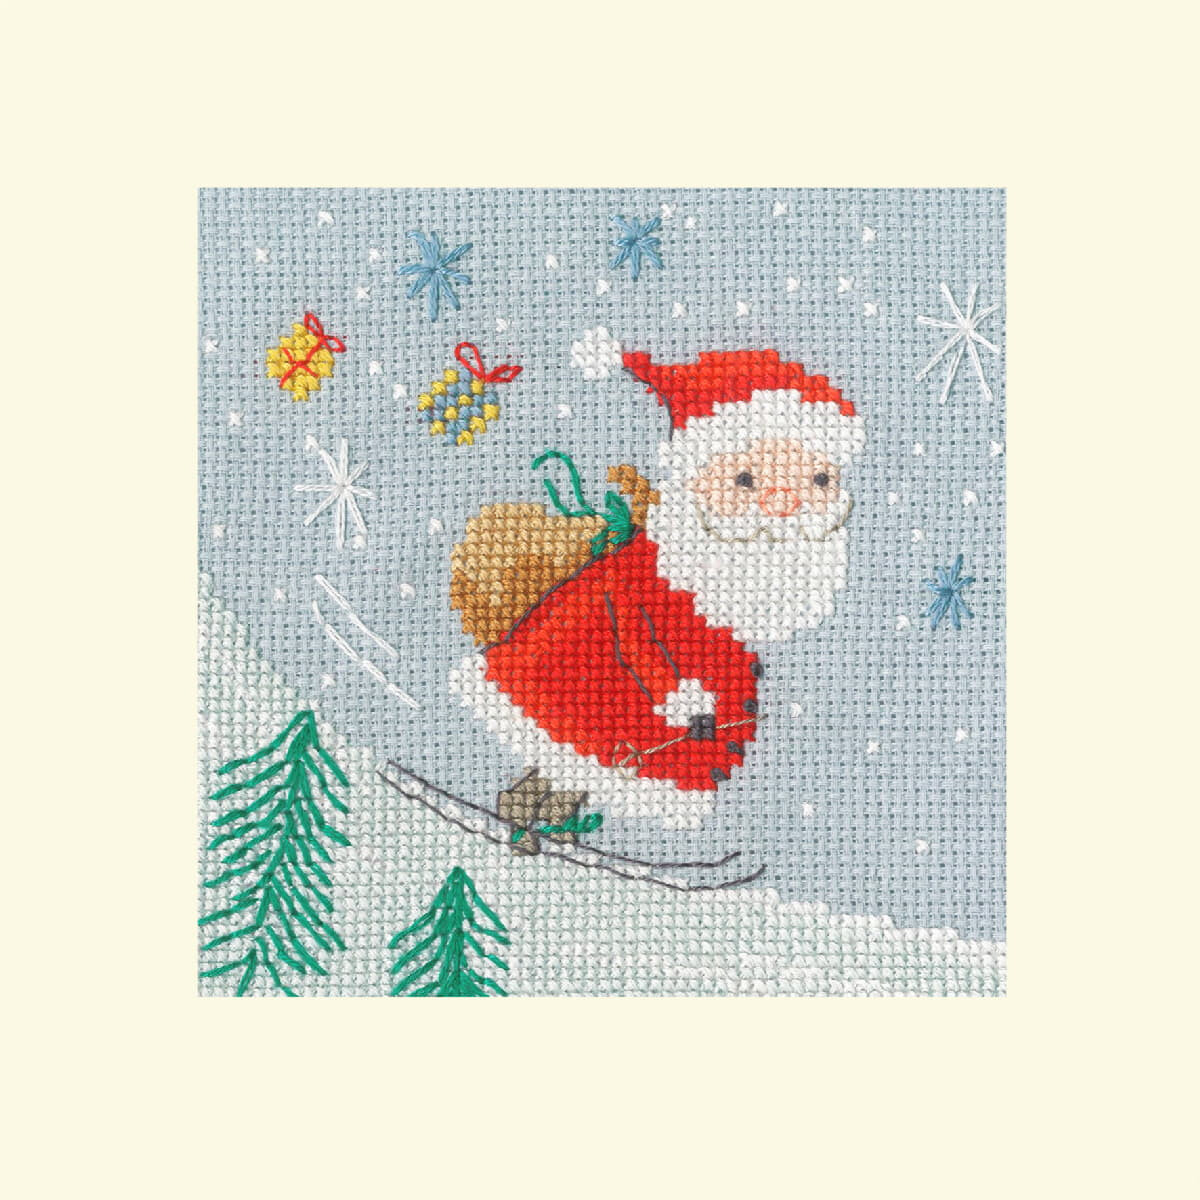 This charming cross stitch design from Bothy Threads...